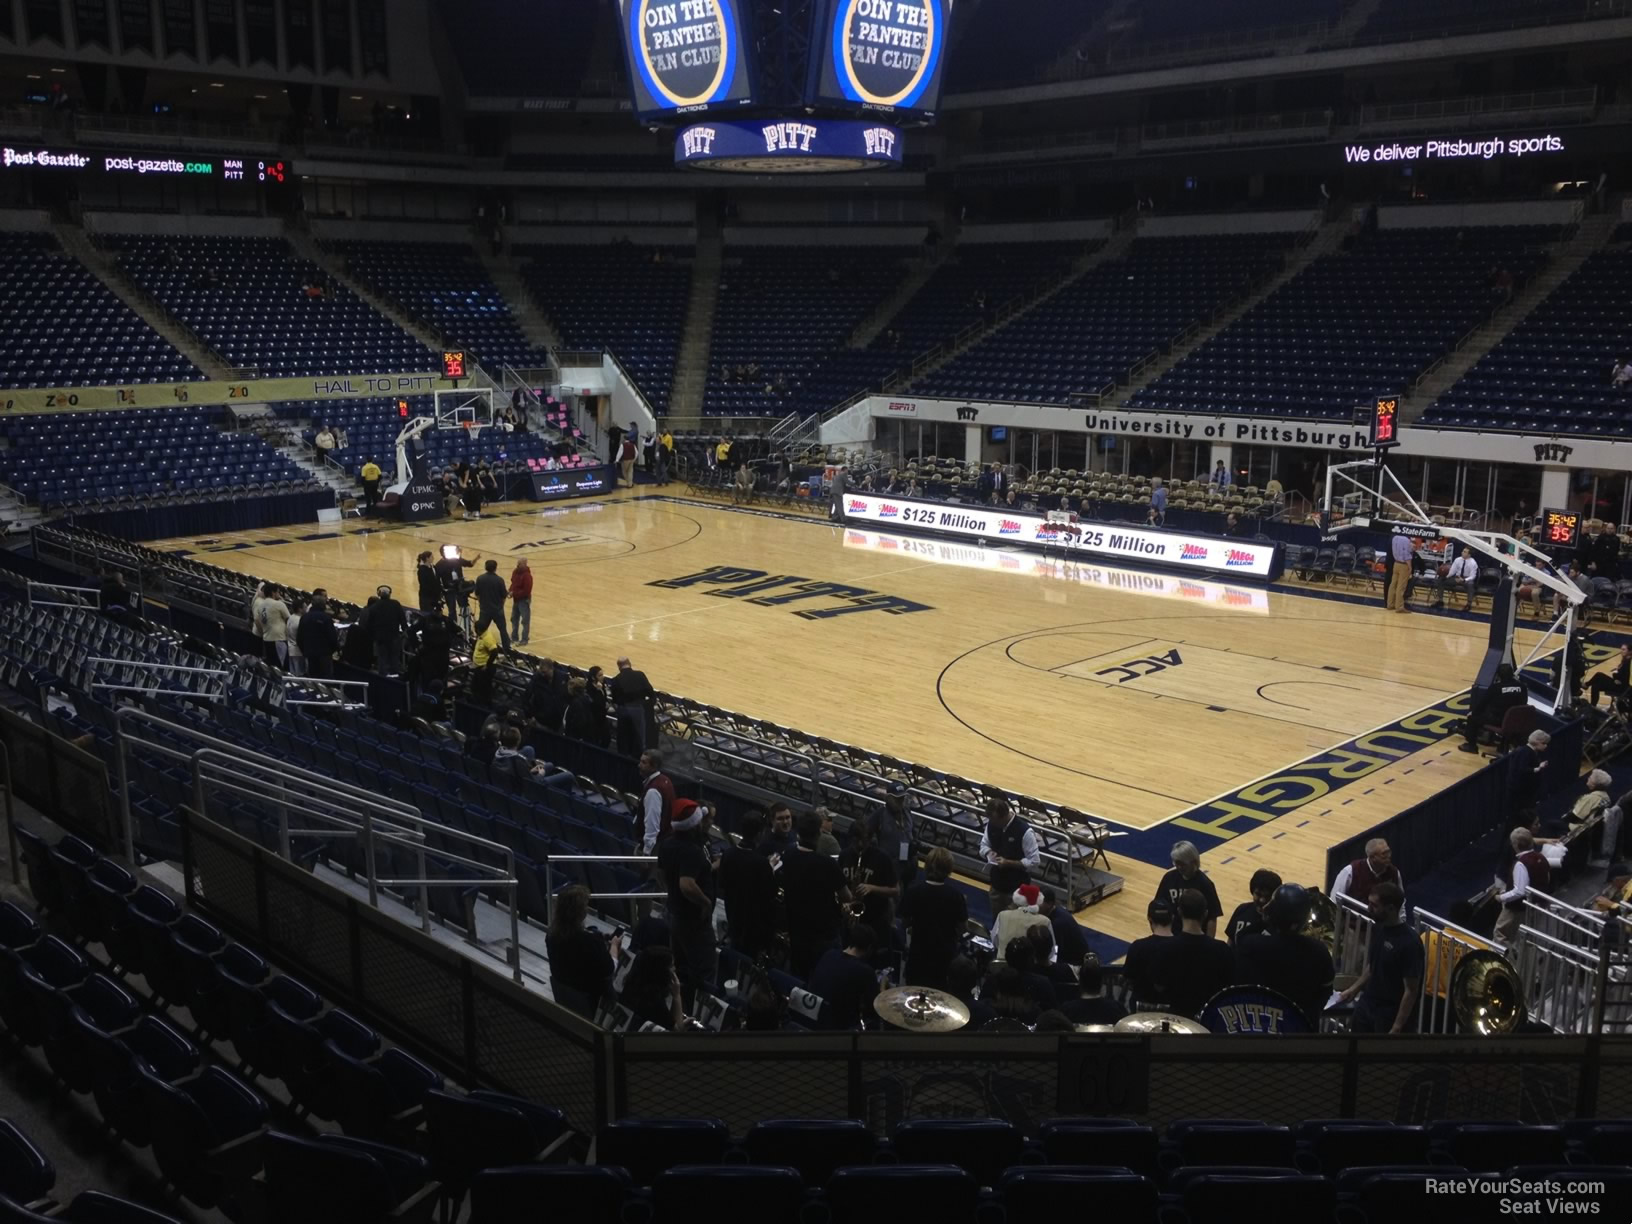 Section 105 at Petersen Events Center